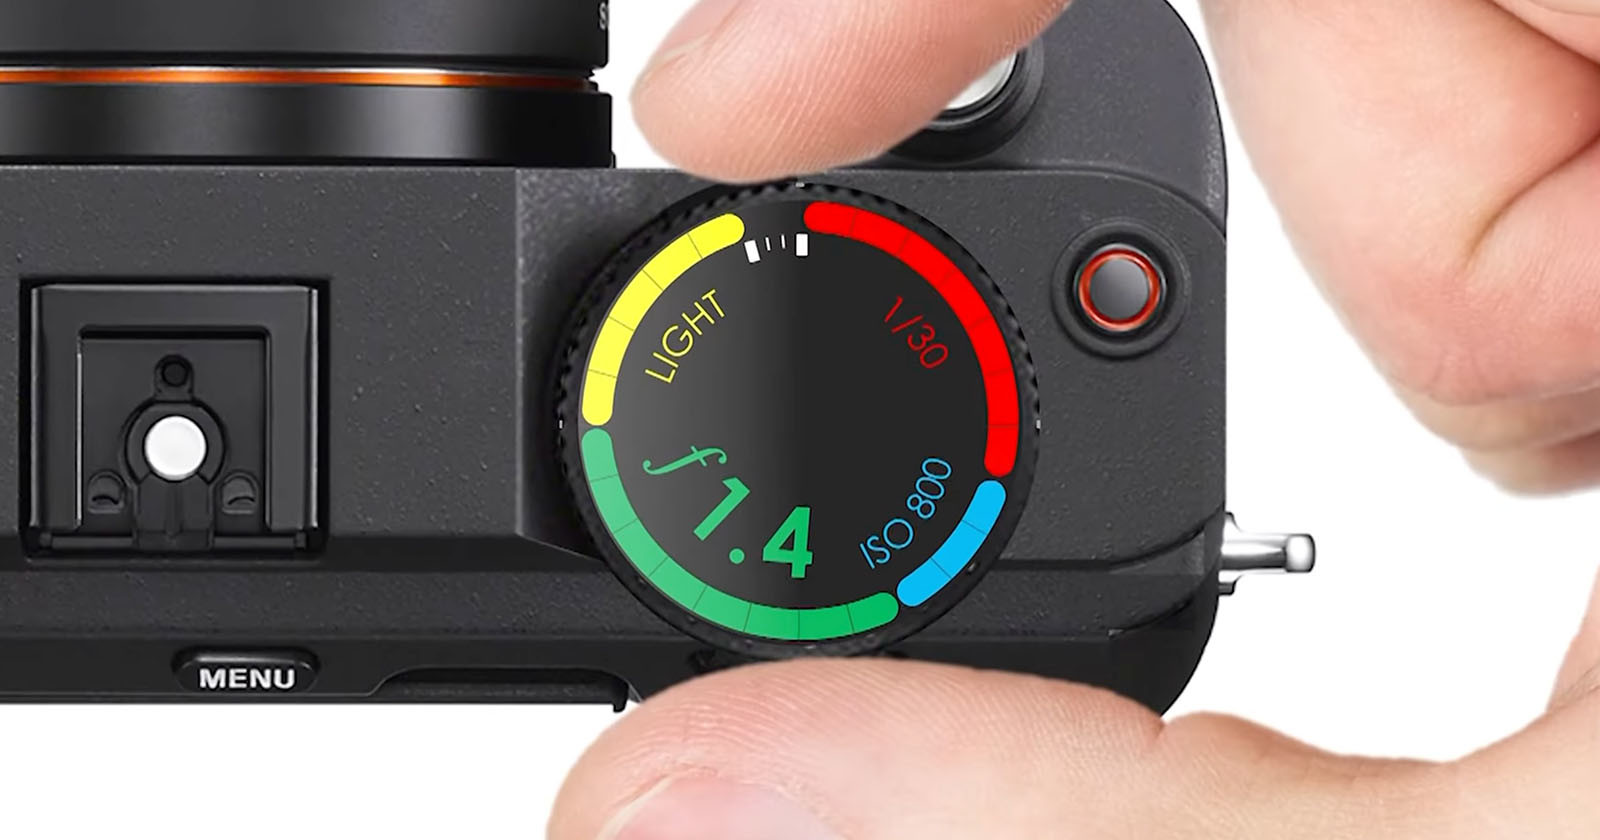 The Exposure Donut for Sony Cameras Simplifies Manual Exposure